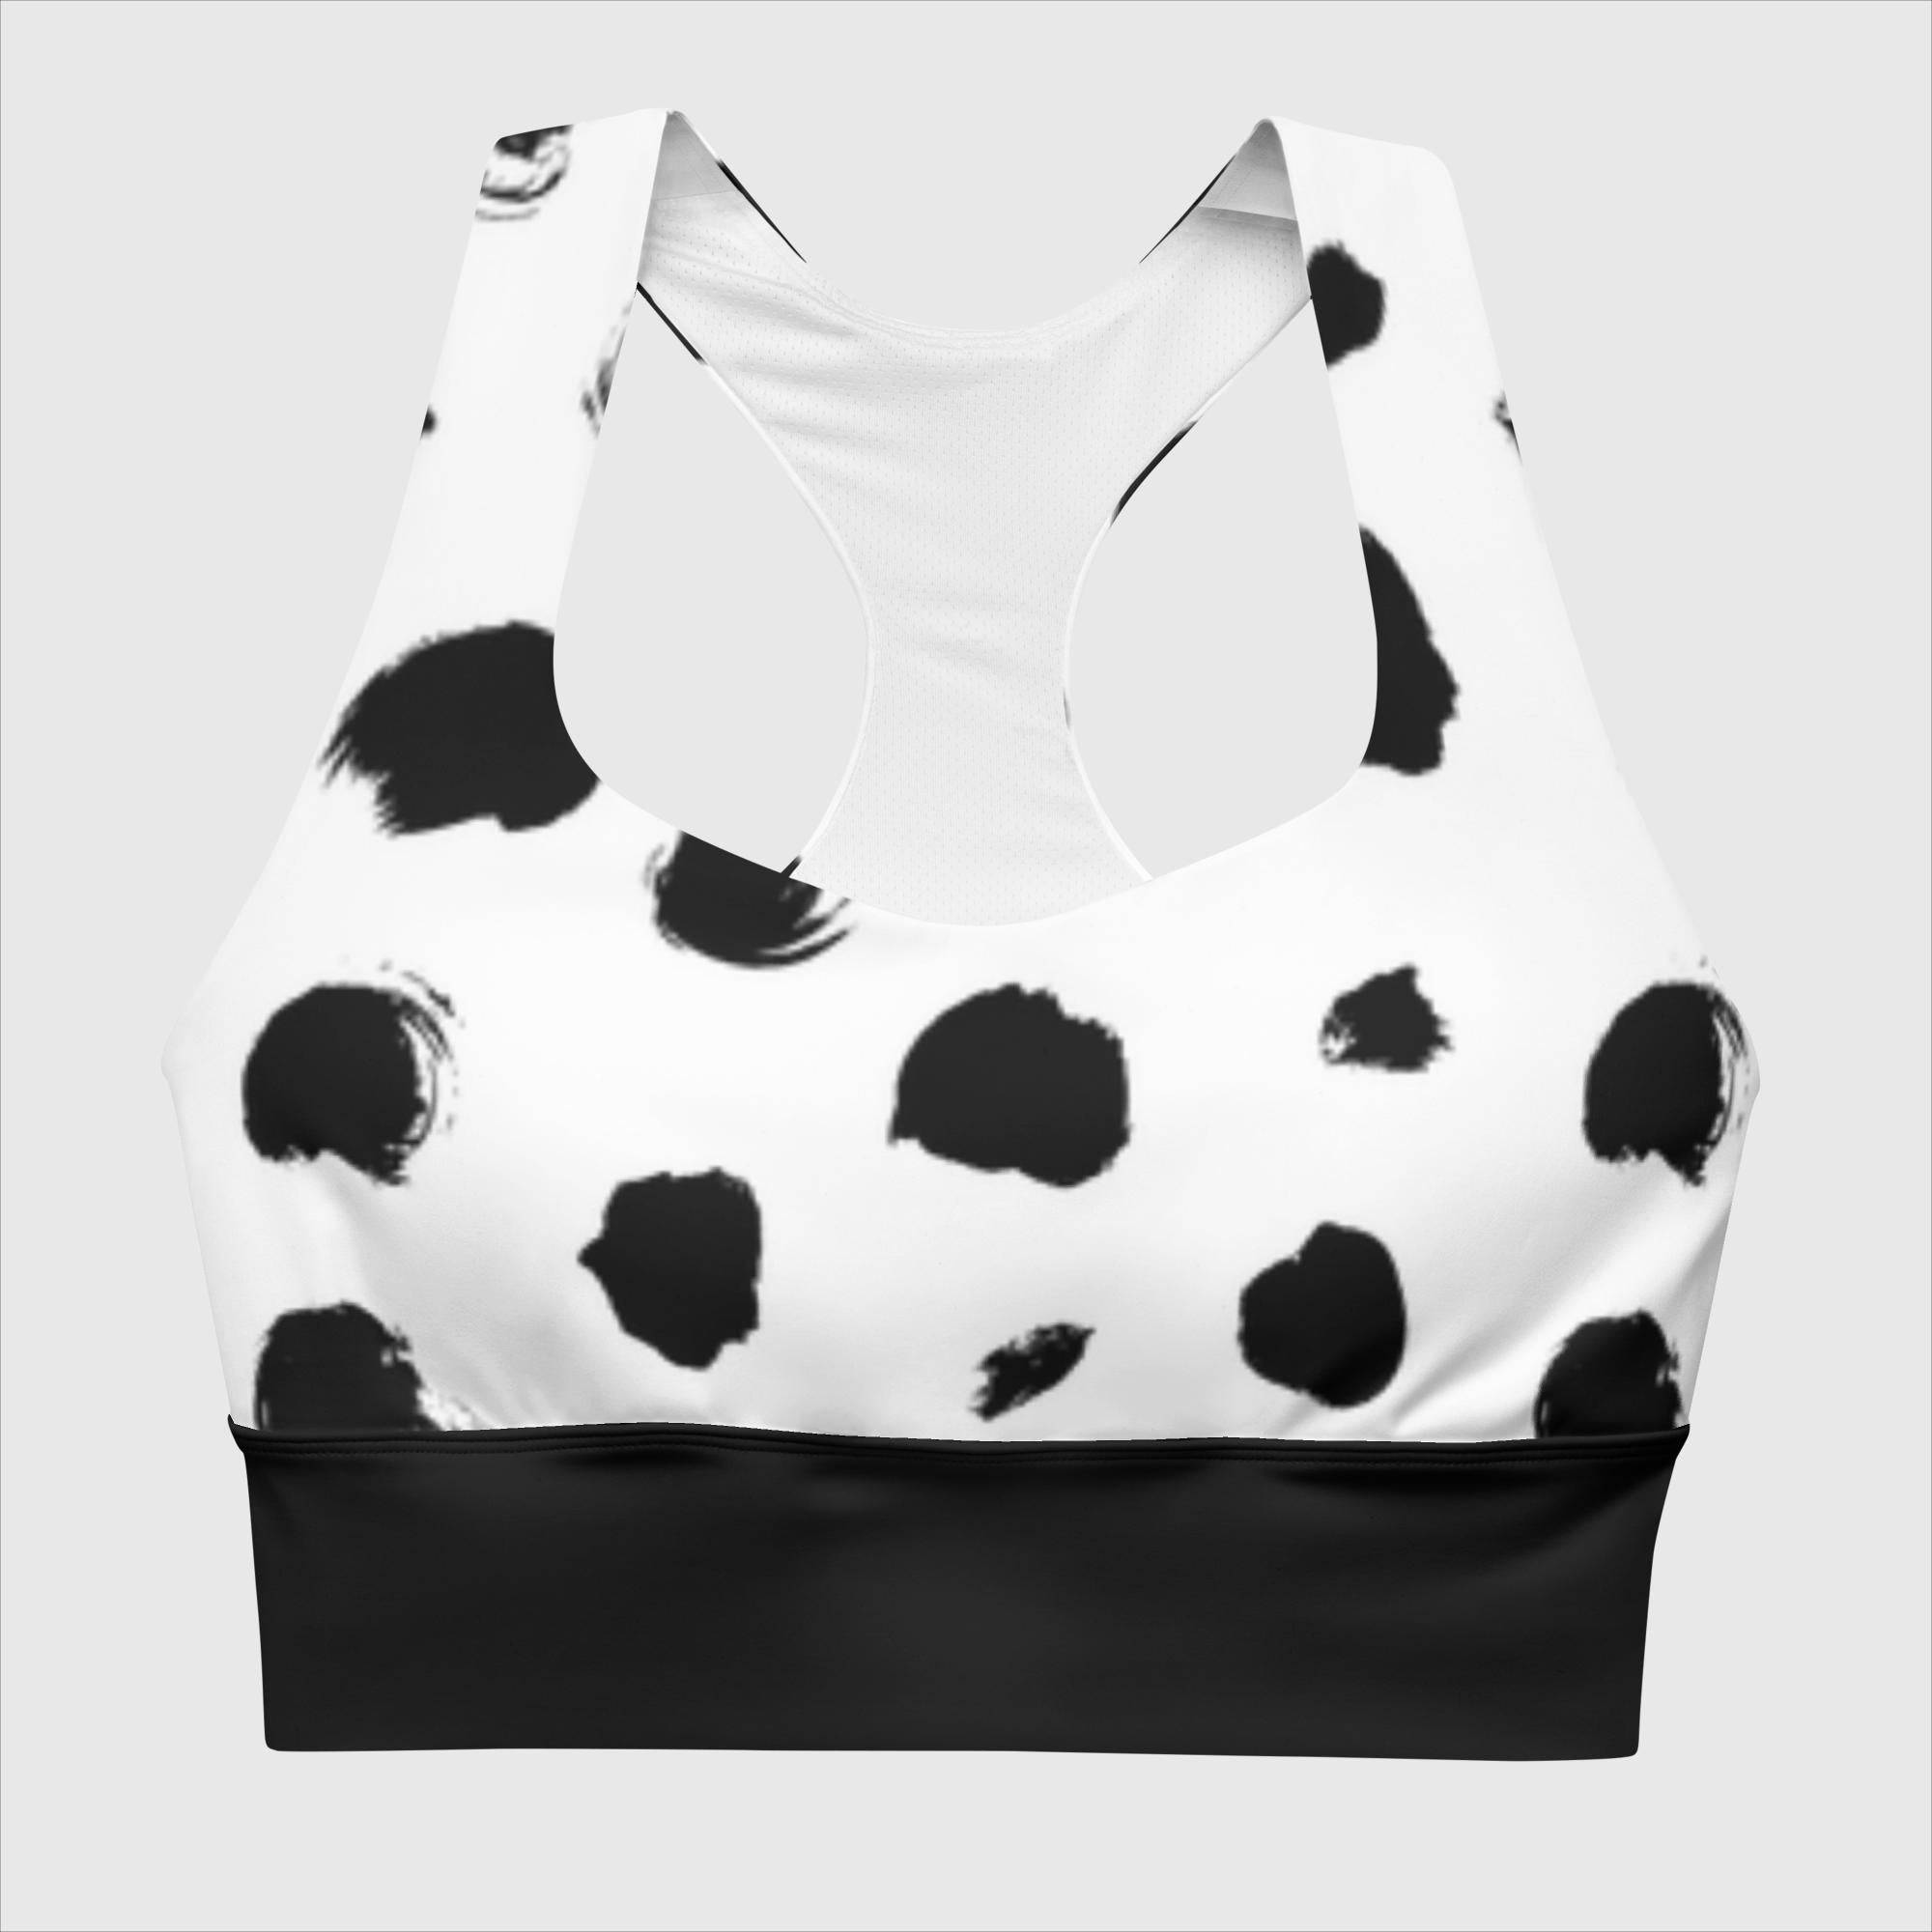 Longline Sports Bra in black and white print with shoulder and breast support.